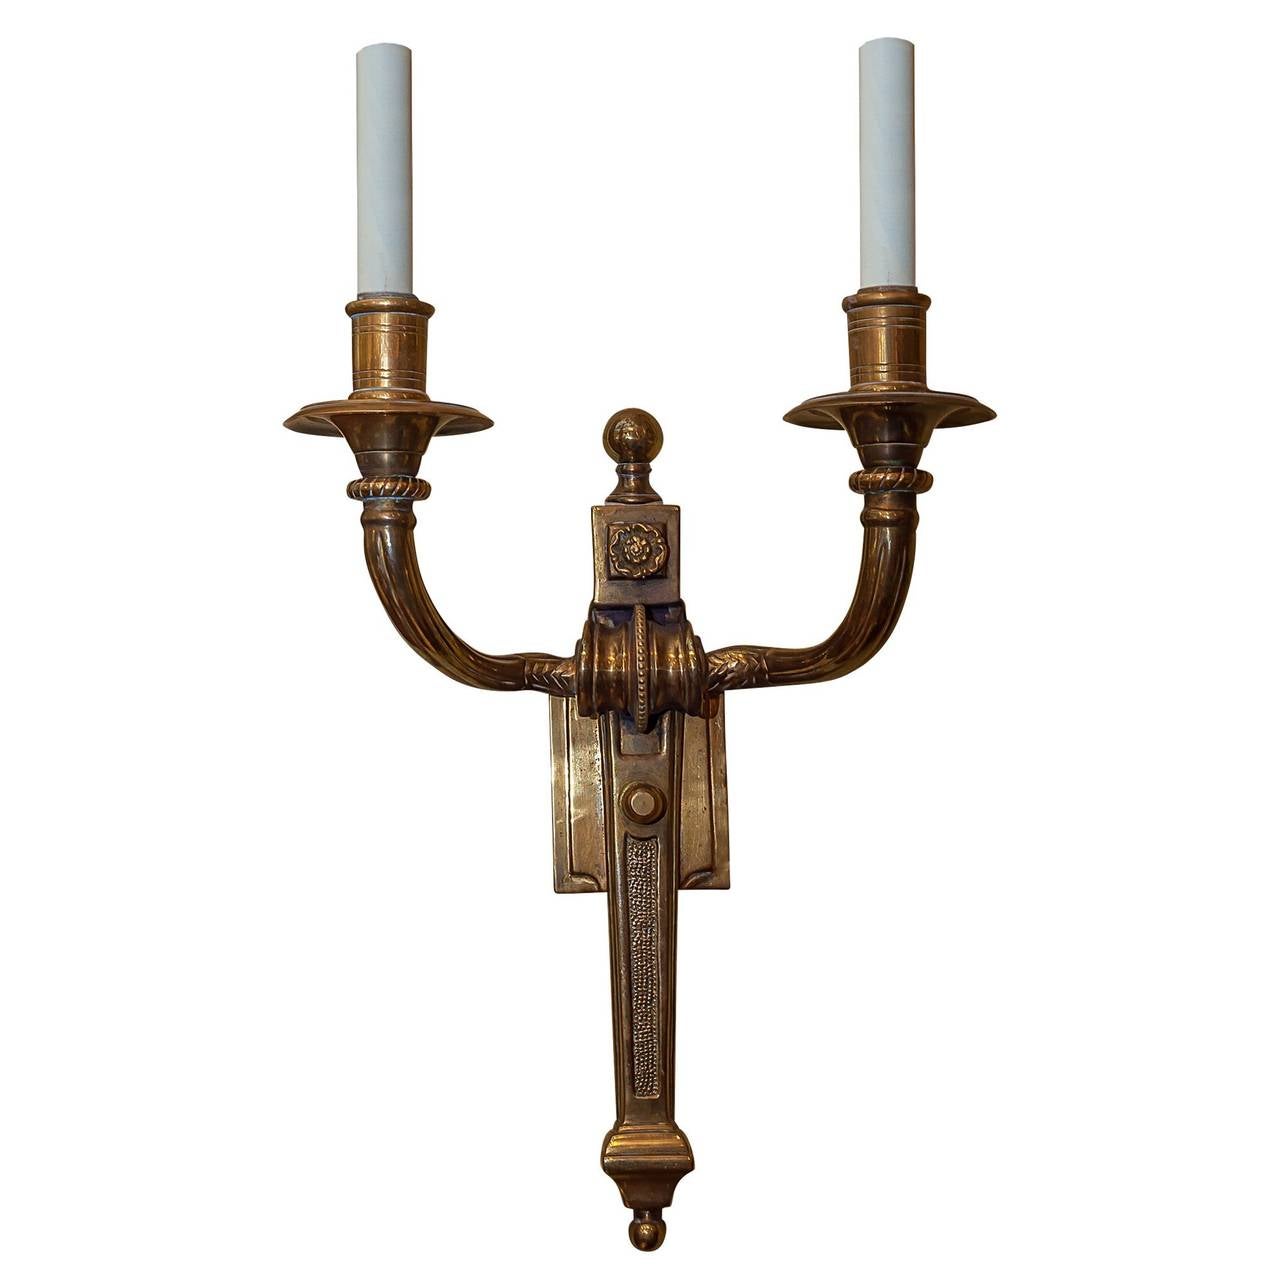 Set of four Gilt Bronze Neoclassical two-Arm Wall Light Sconces
Stock Number: L214